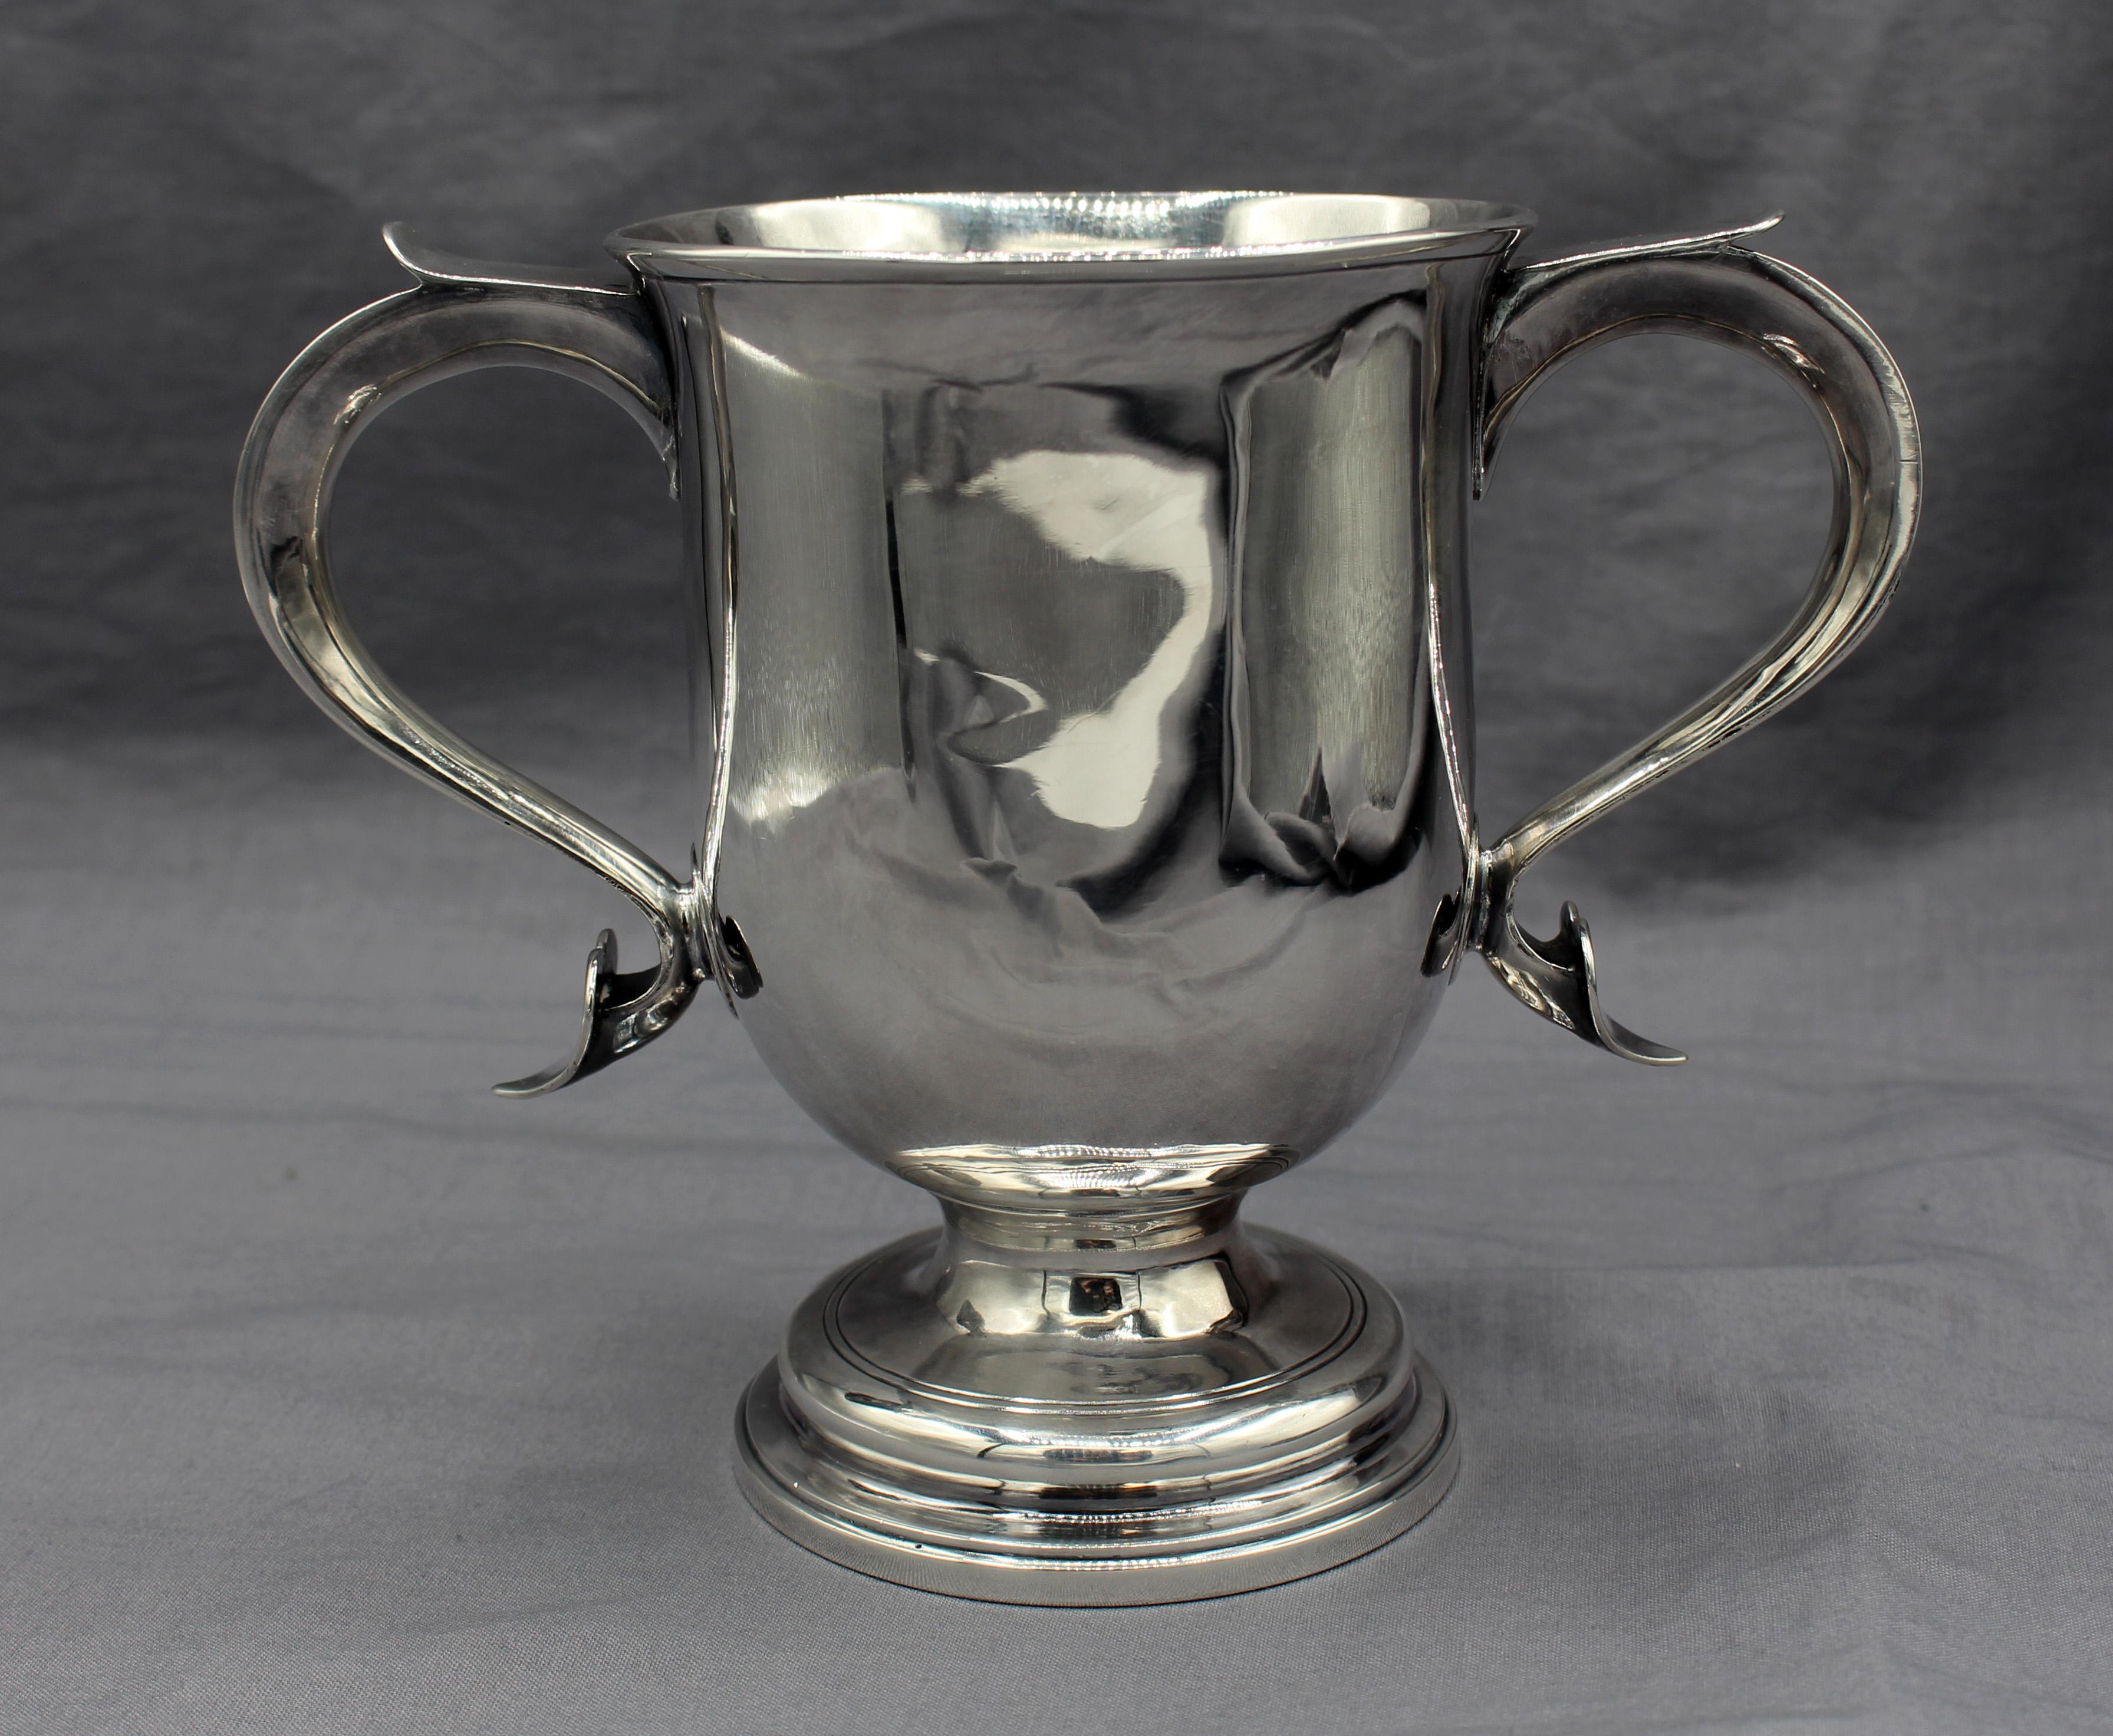 English sterling silver two-handled loving cup, London, 1775. A handsome George III period example likely by Stephen Joyce working at King St., Soho, 1773-1778. 12.85 troy oz.
6.5